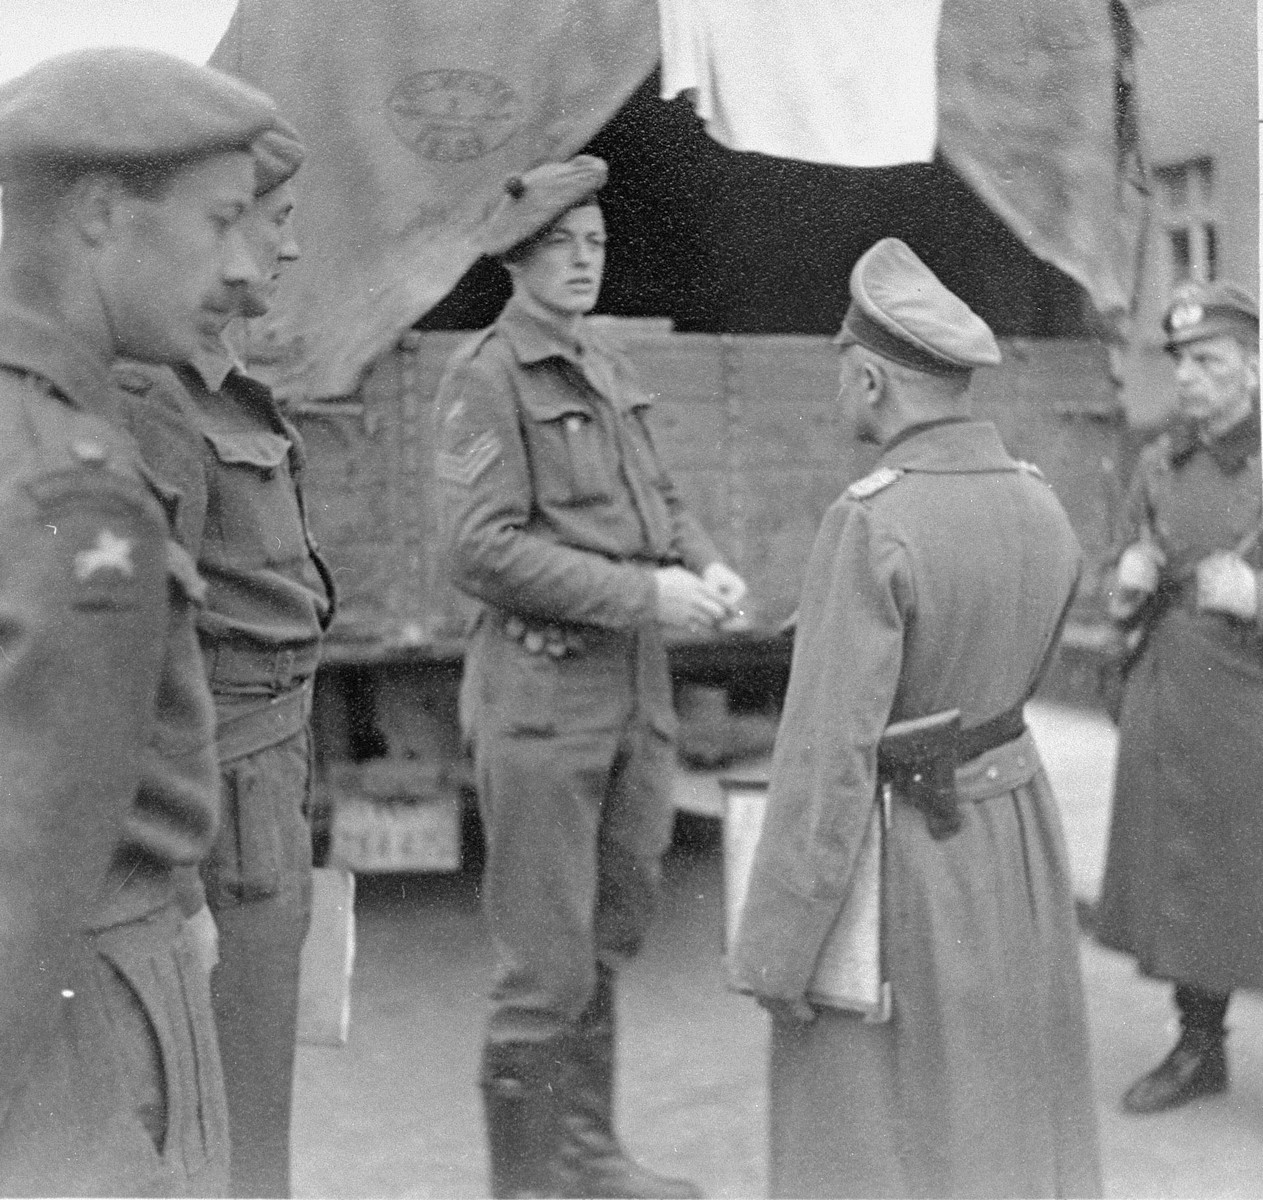 British soldiers accepting the surrender of a German officer in Bergen-Belsen.